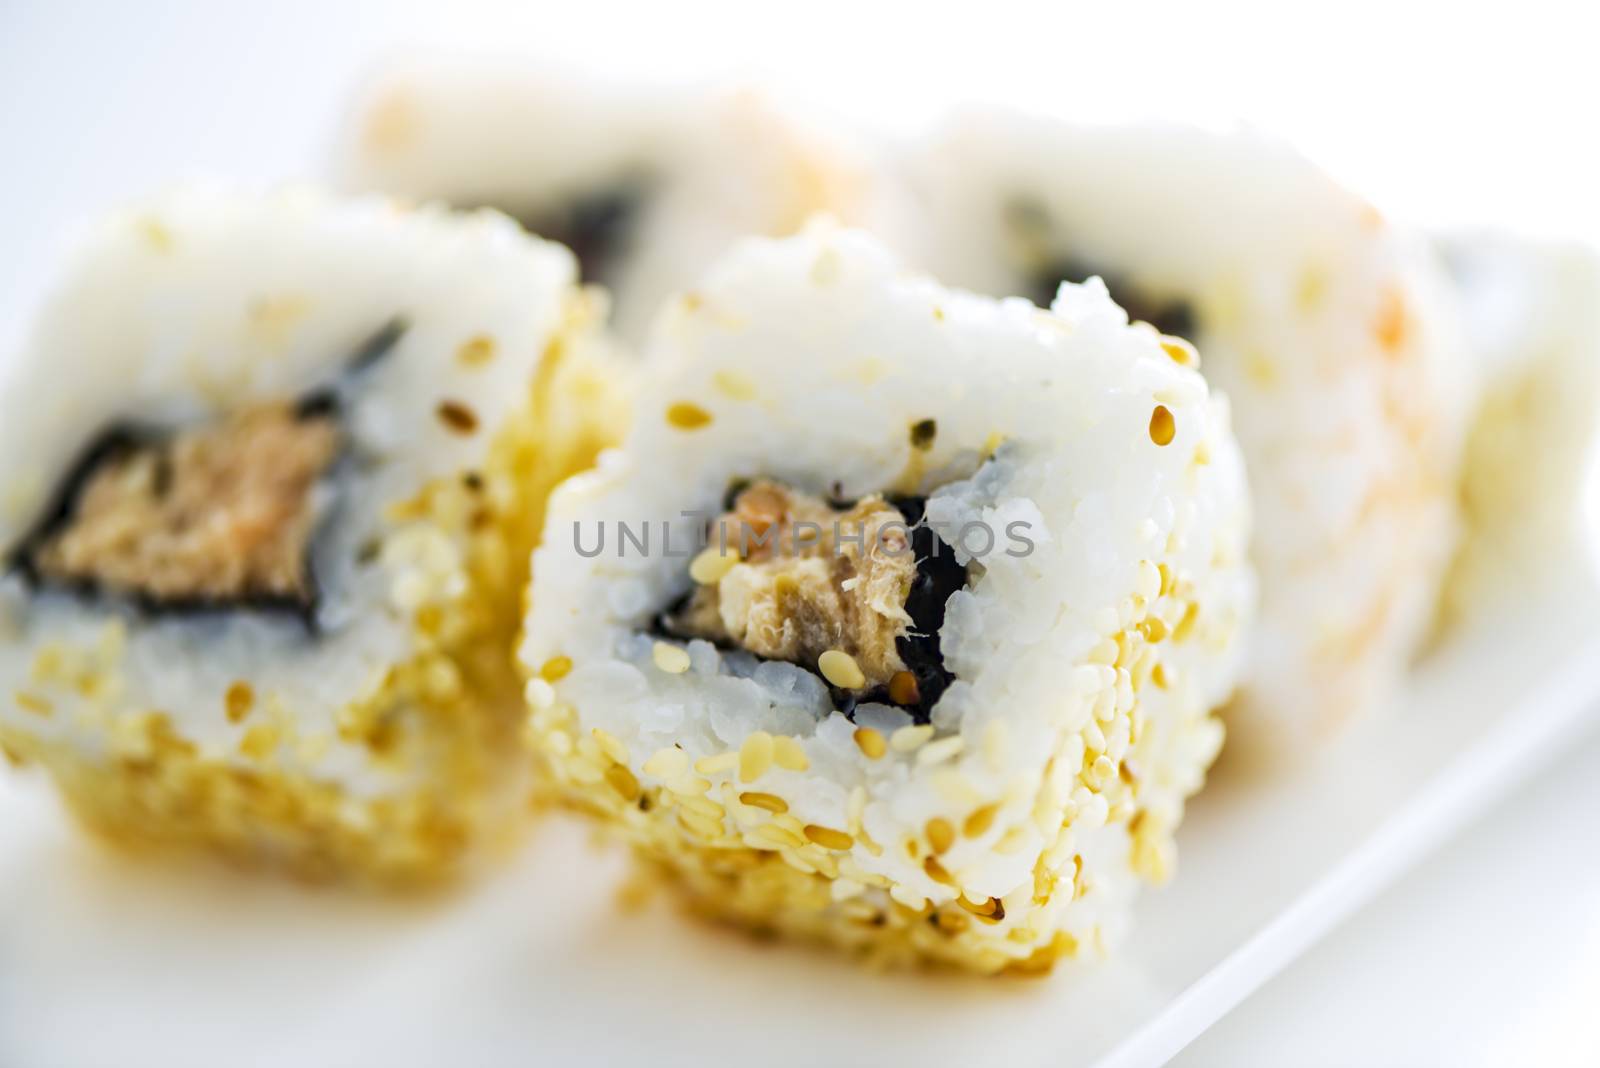 Japanese Cuisine - Sushi Roll with tuna and sesame seed